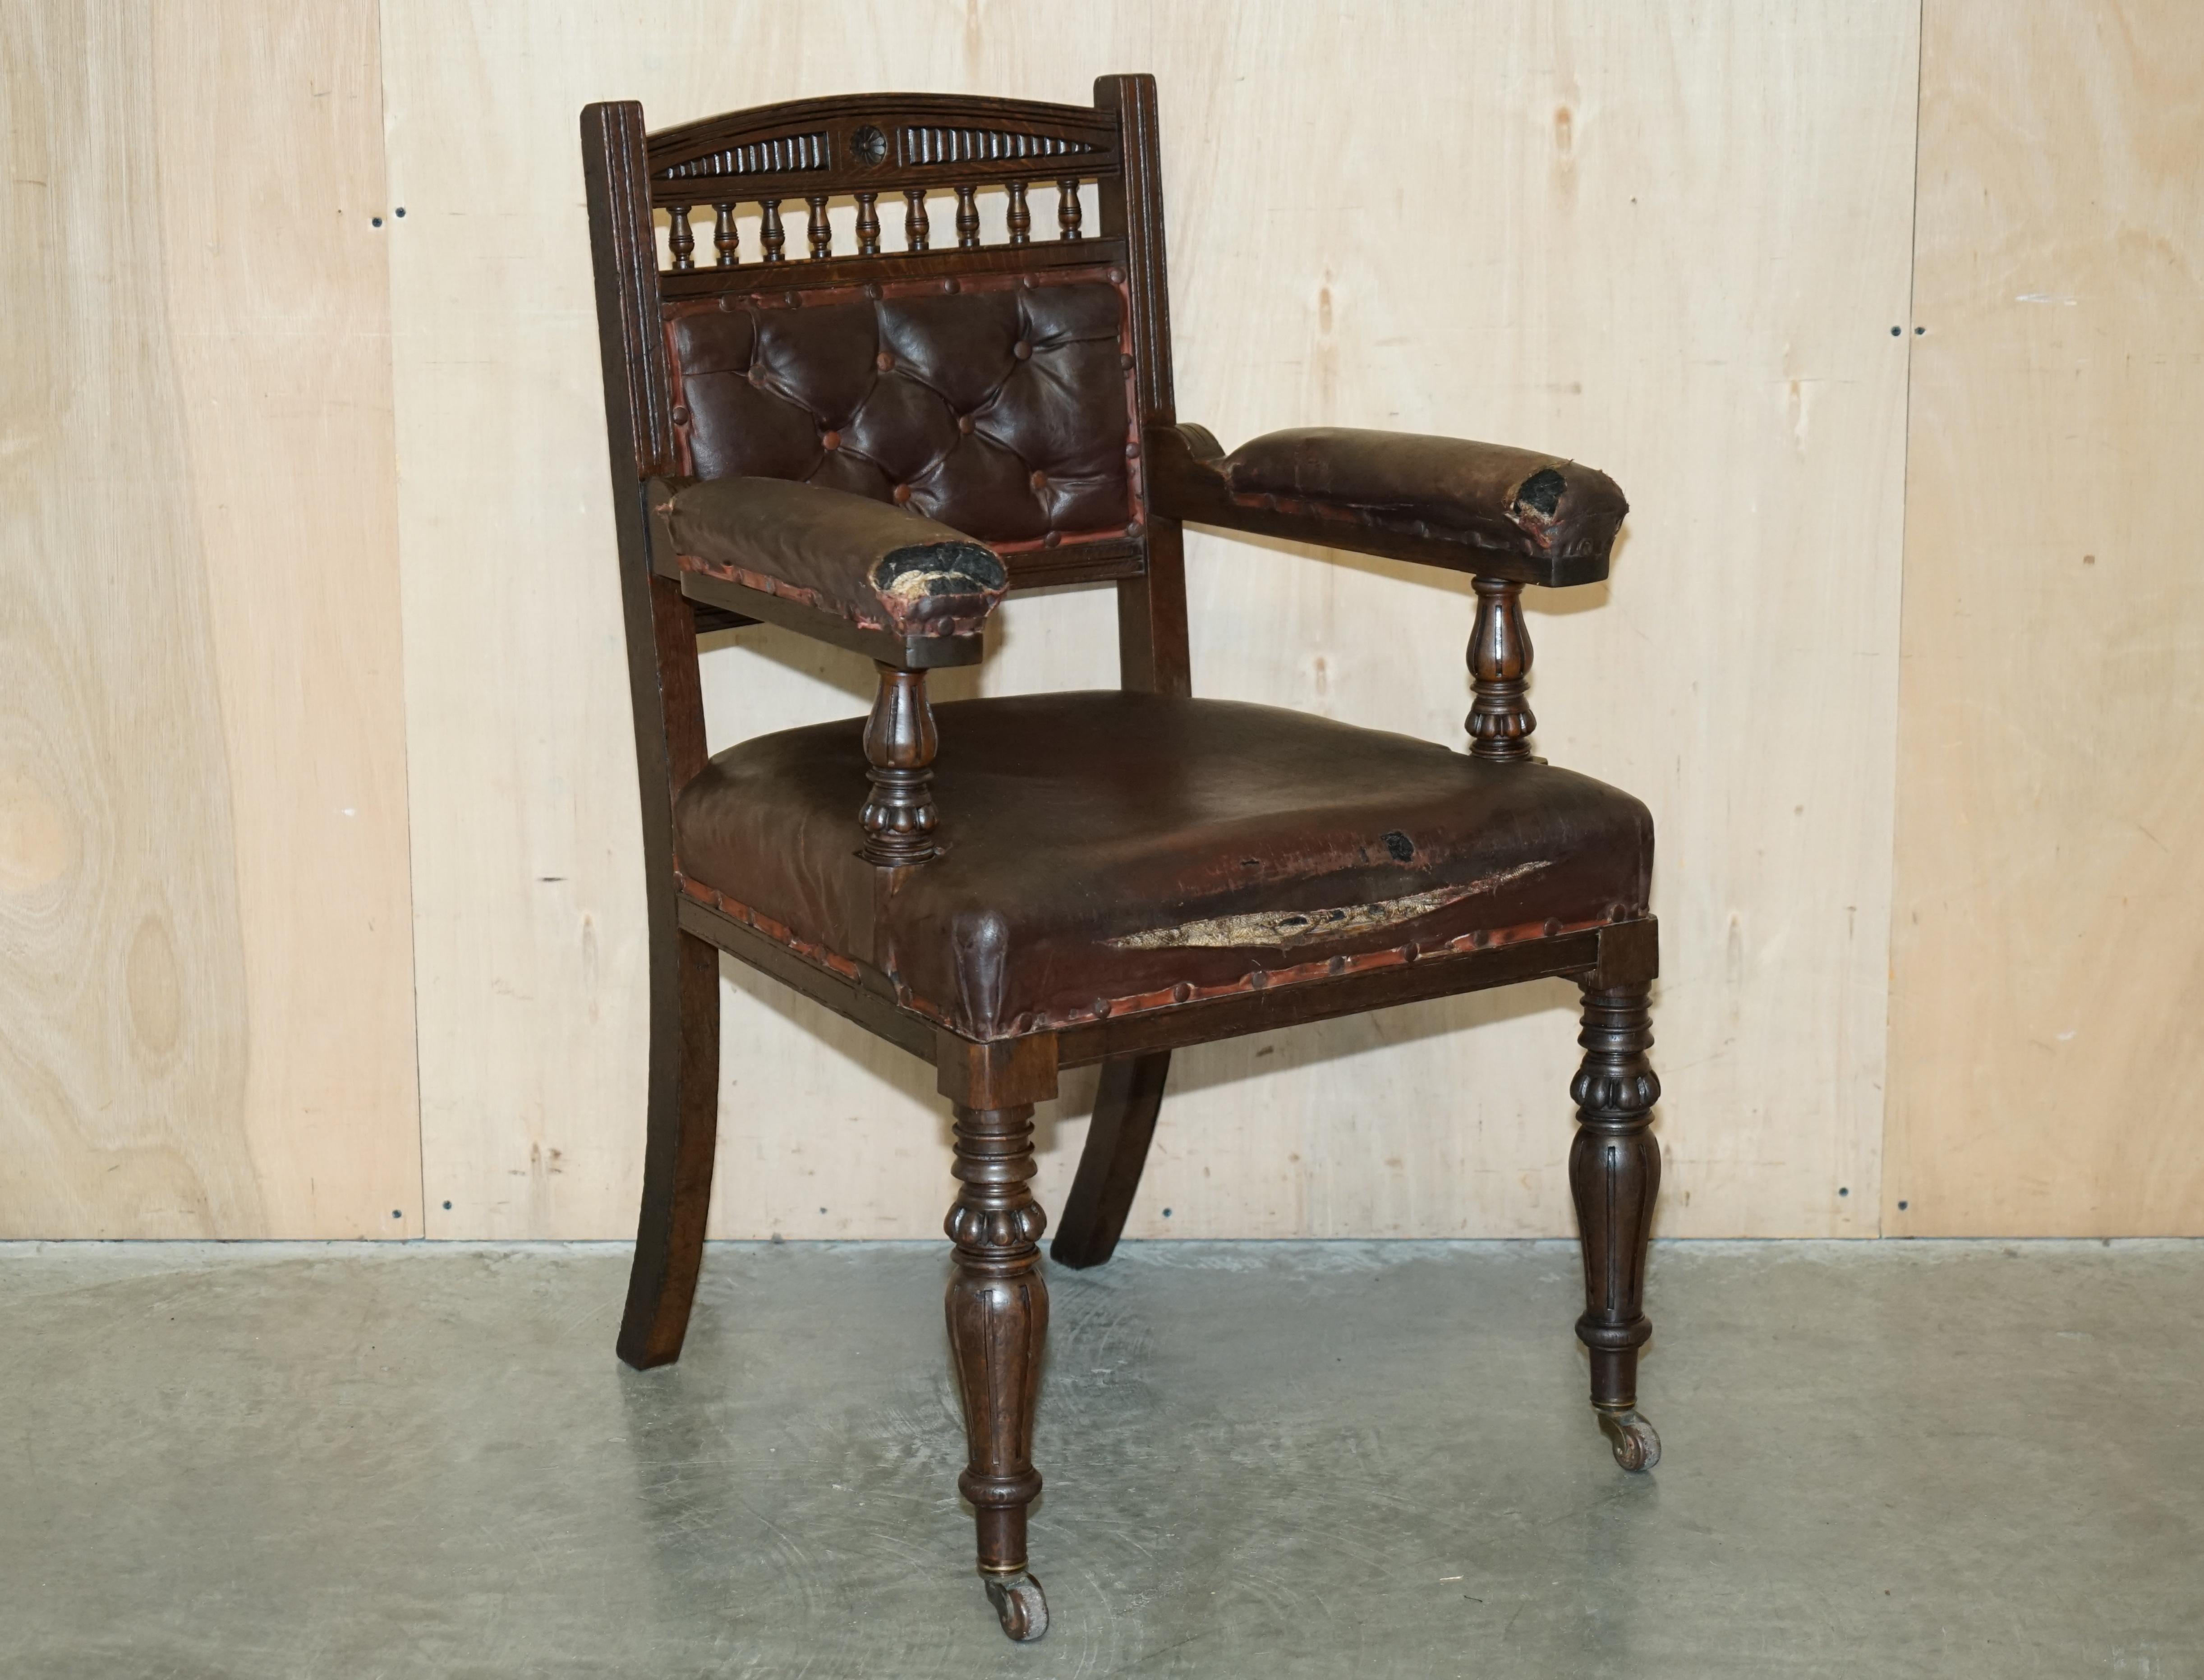 Royal House Antiques

Royal House Antiques is delighted to offer for sale this original Aesthetic Movement style Victorian circa 1860 armchair for restoration with original brown leather upholstery 

Please note the delivery fee listed is just a